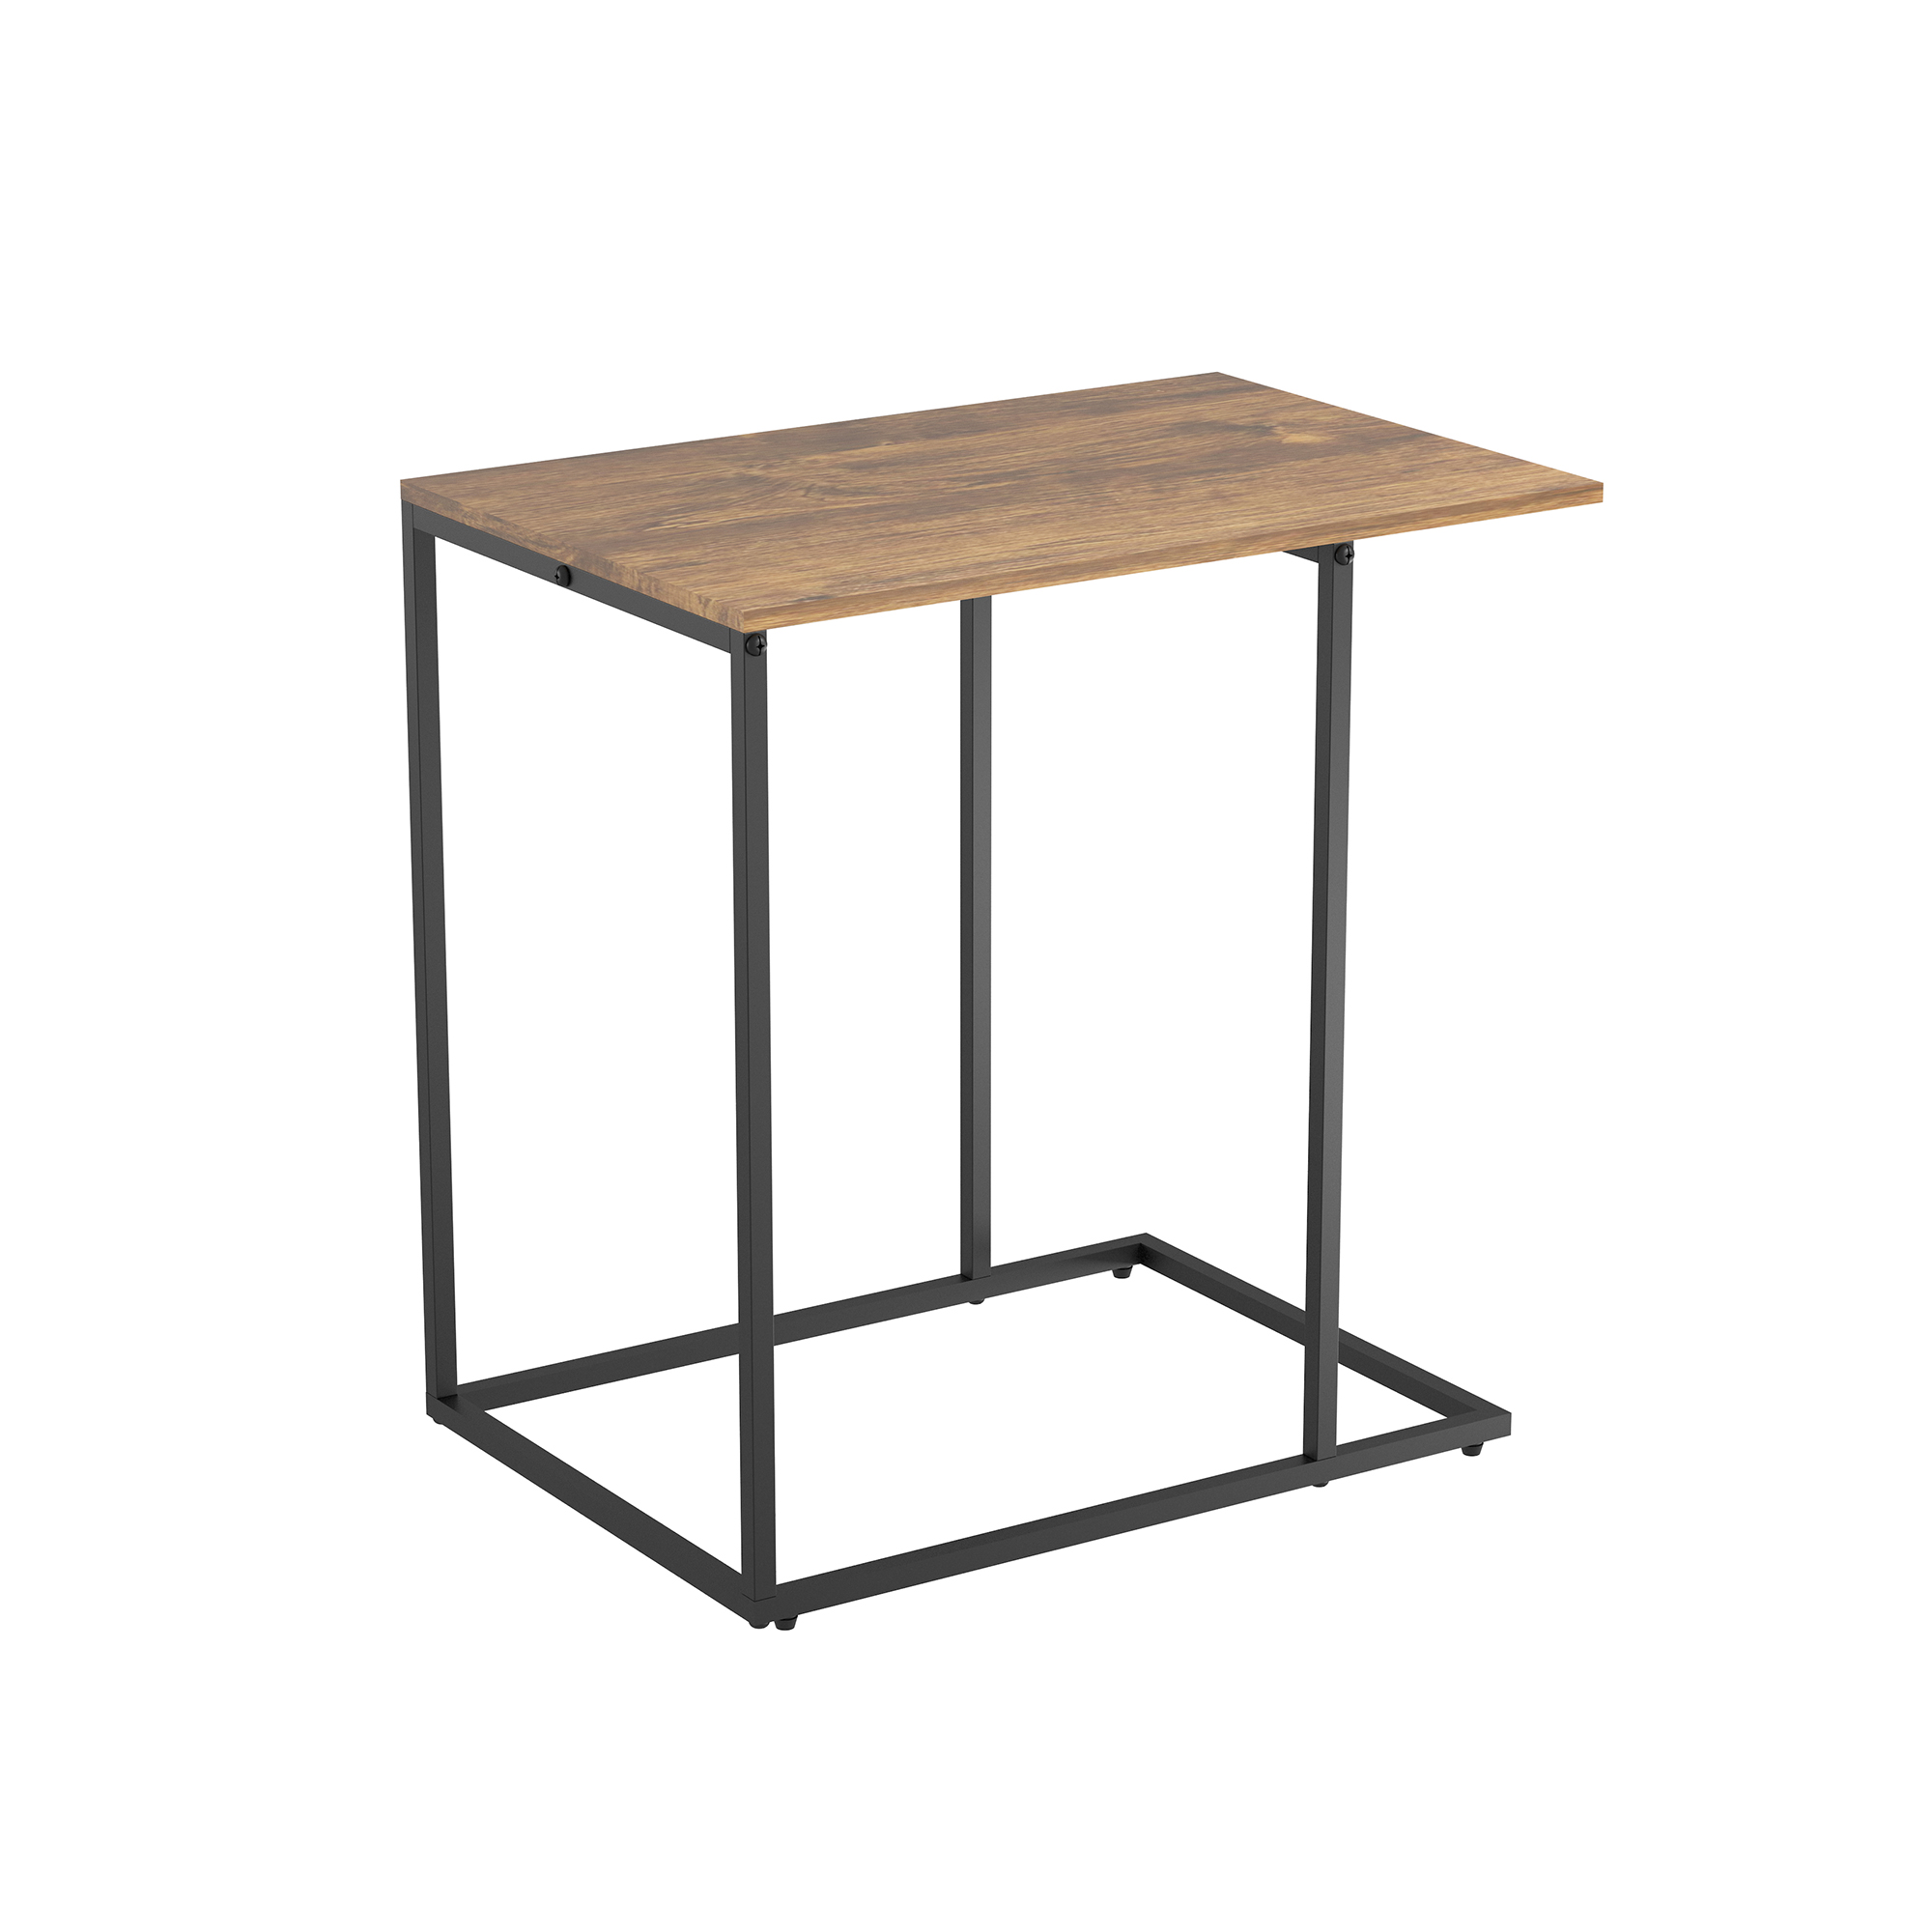 C-Shaped Side Table